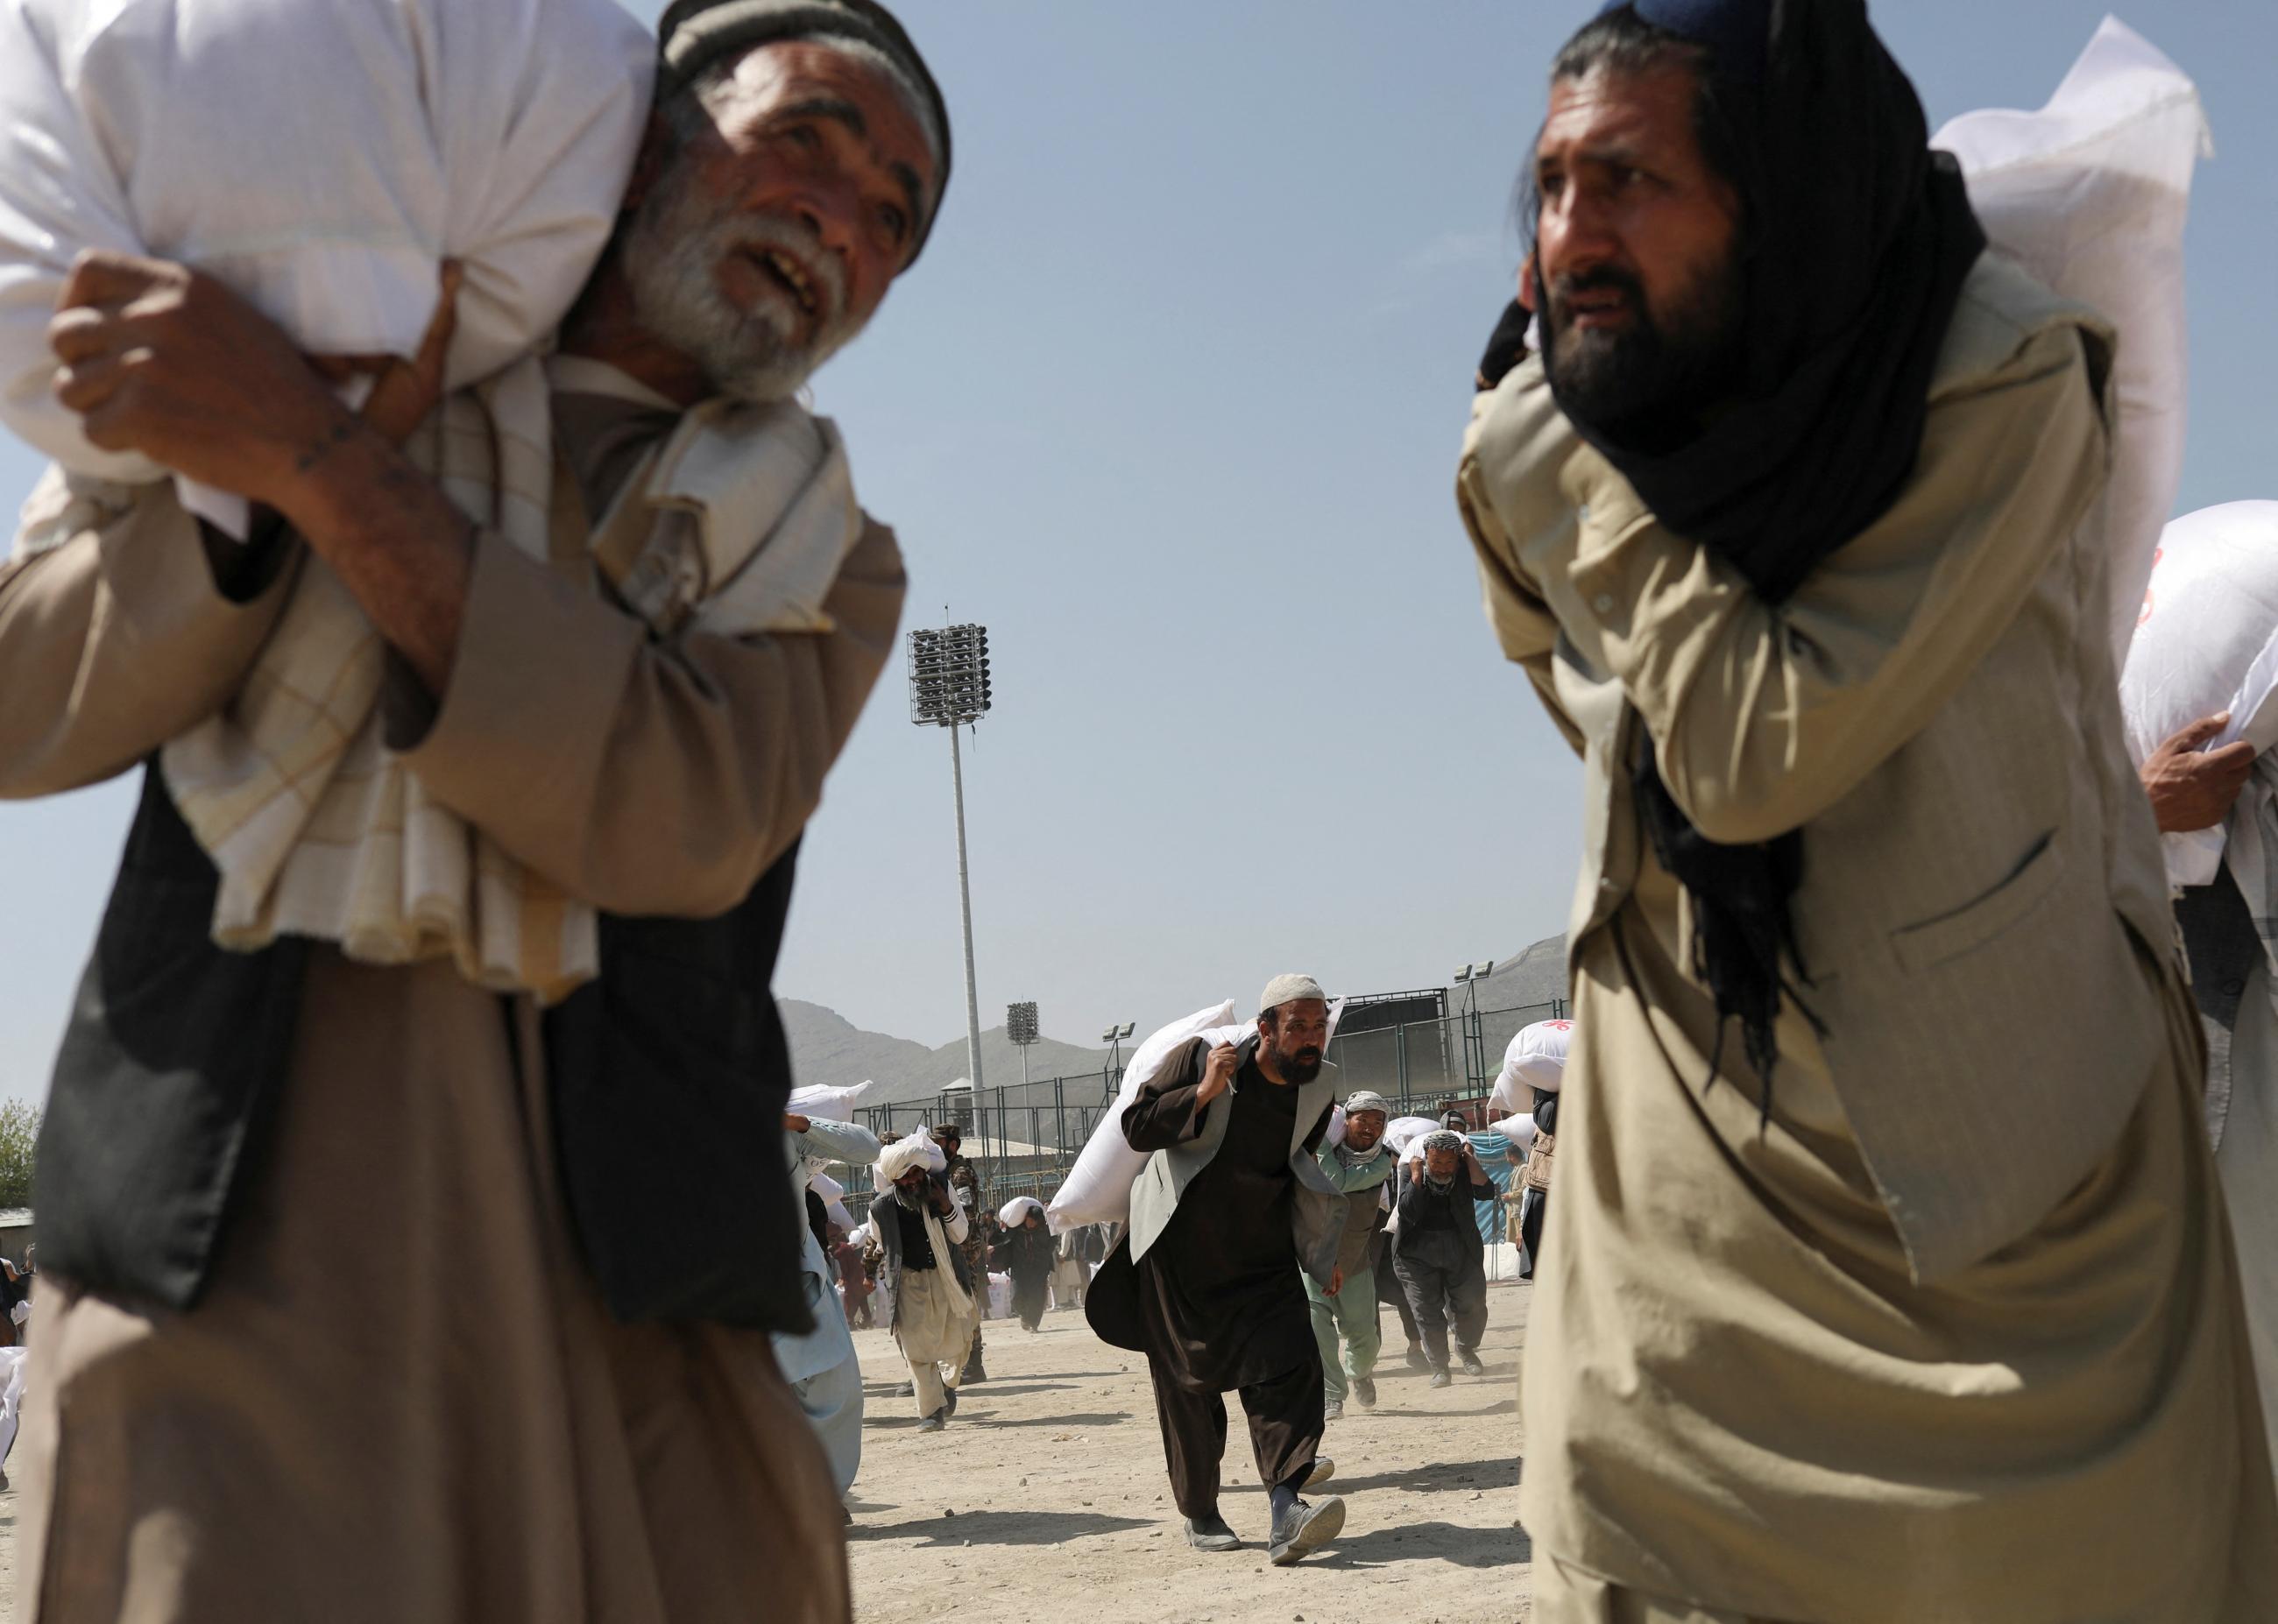 In the foreground of the photo, two men with beards carry large sacks of rice over their shoulders, while other men carry sacks in the background. The rice donations are part of a humanitarian aid effort, sent by China to Afghanistan, at a distribution center in Kabul, Afghanistan, on April 7, 2022. 